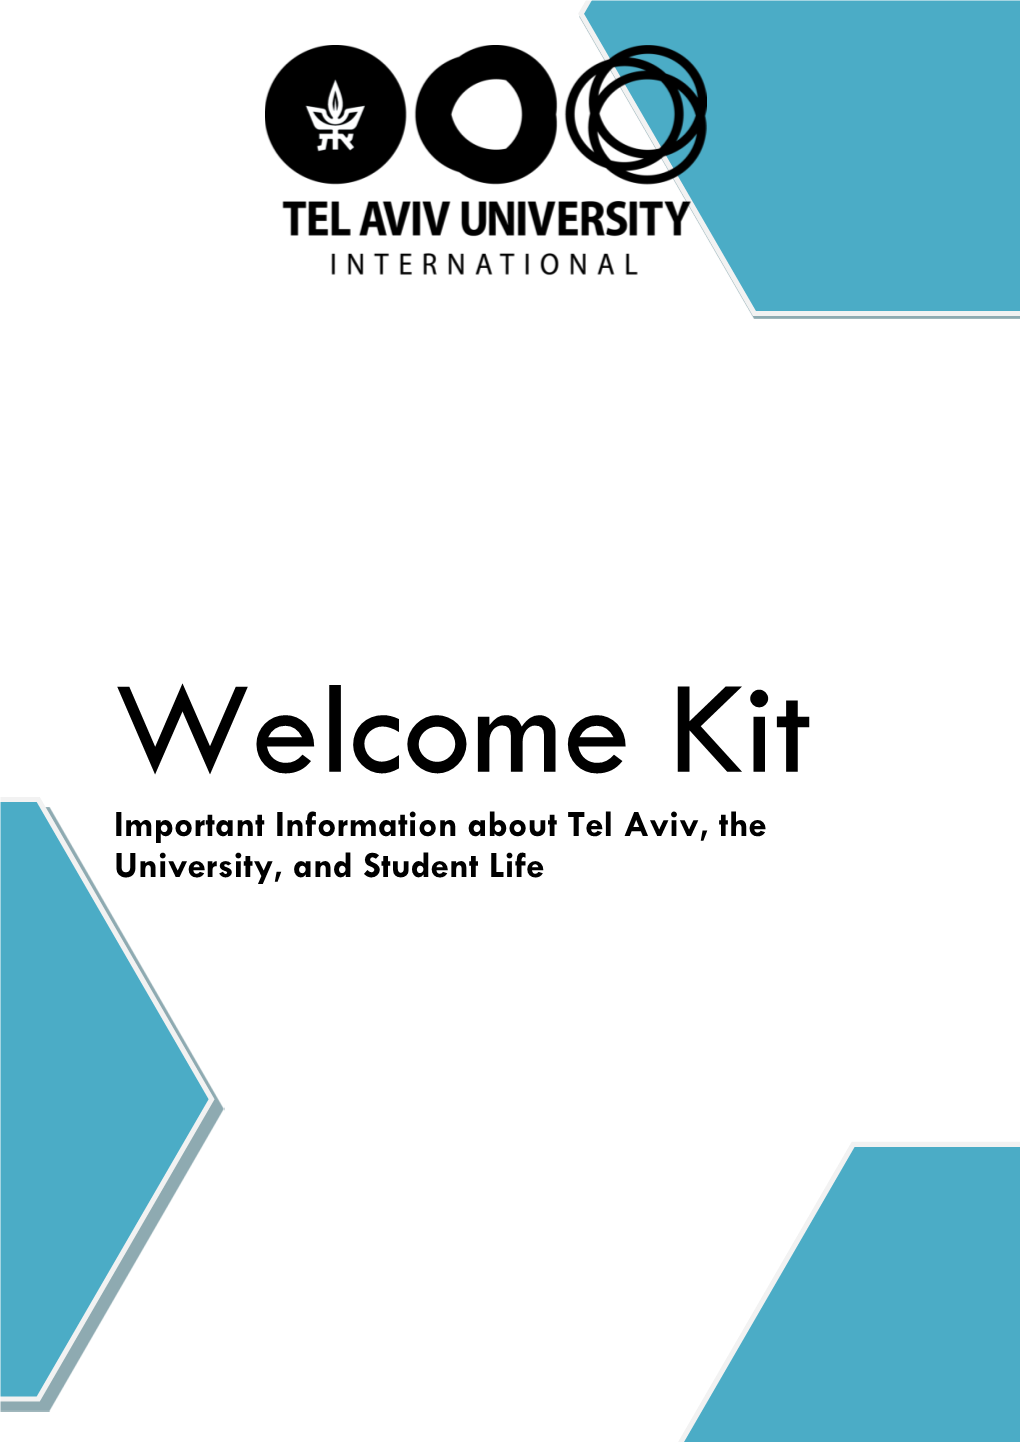 Welcome Kit Important Information About Tel Aviv, the University, and Student Life